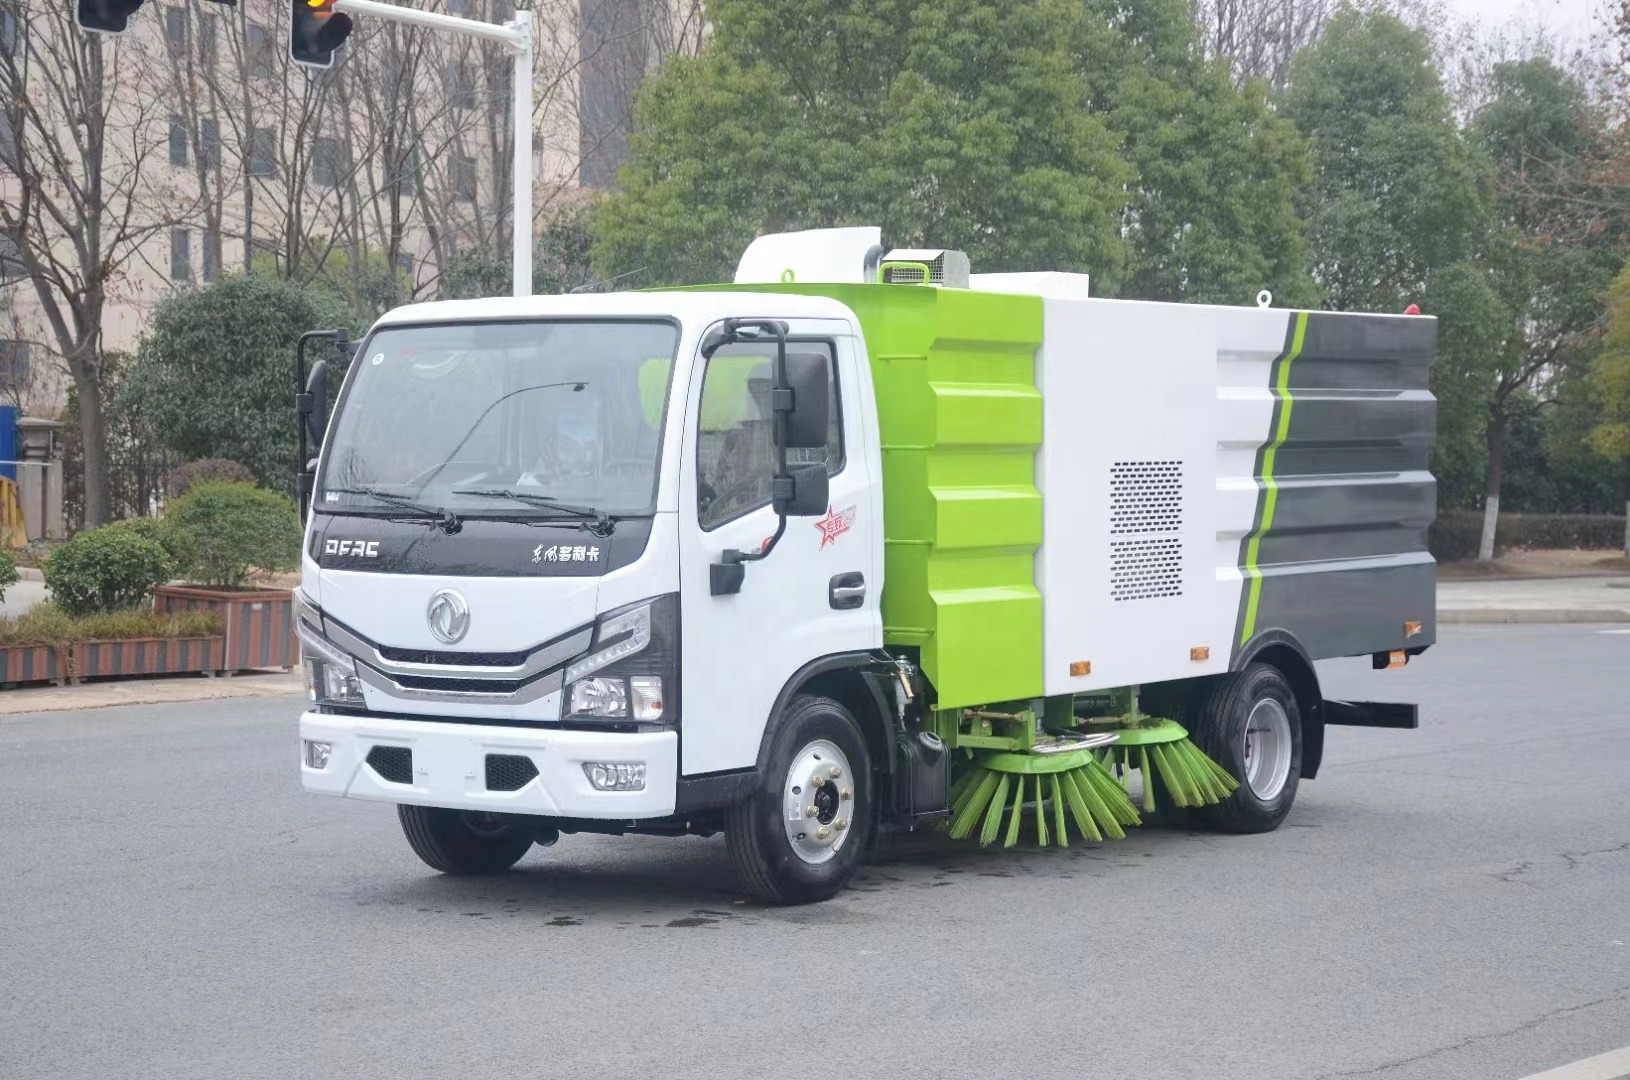 Urban Road Sweeper Truck for Cleanliness